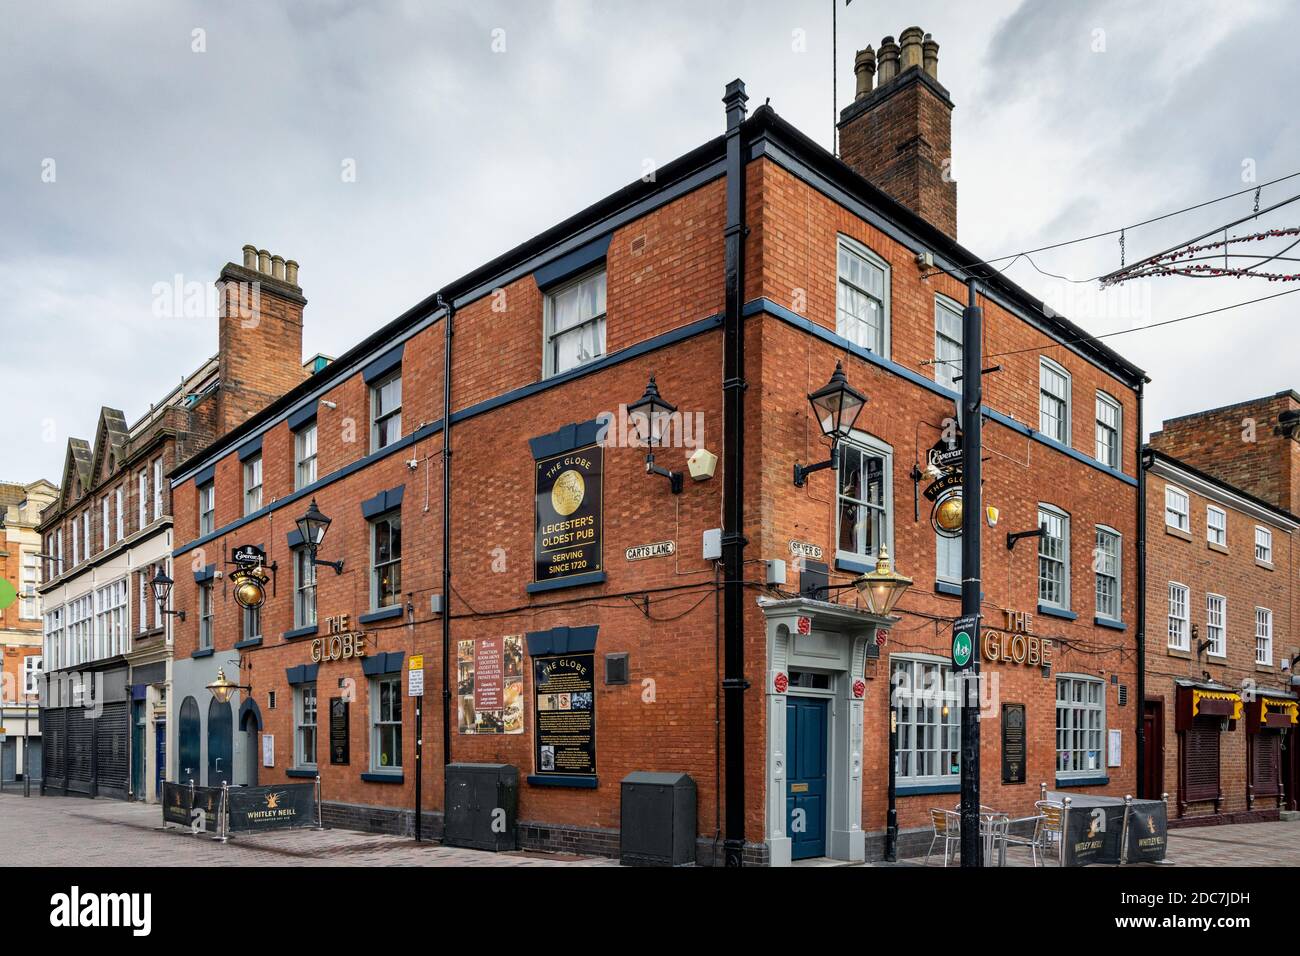 The Globe public house on Silver Street dating back to 1720, Leicester's oldest pub. Stock Photo